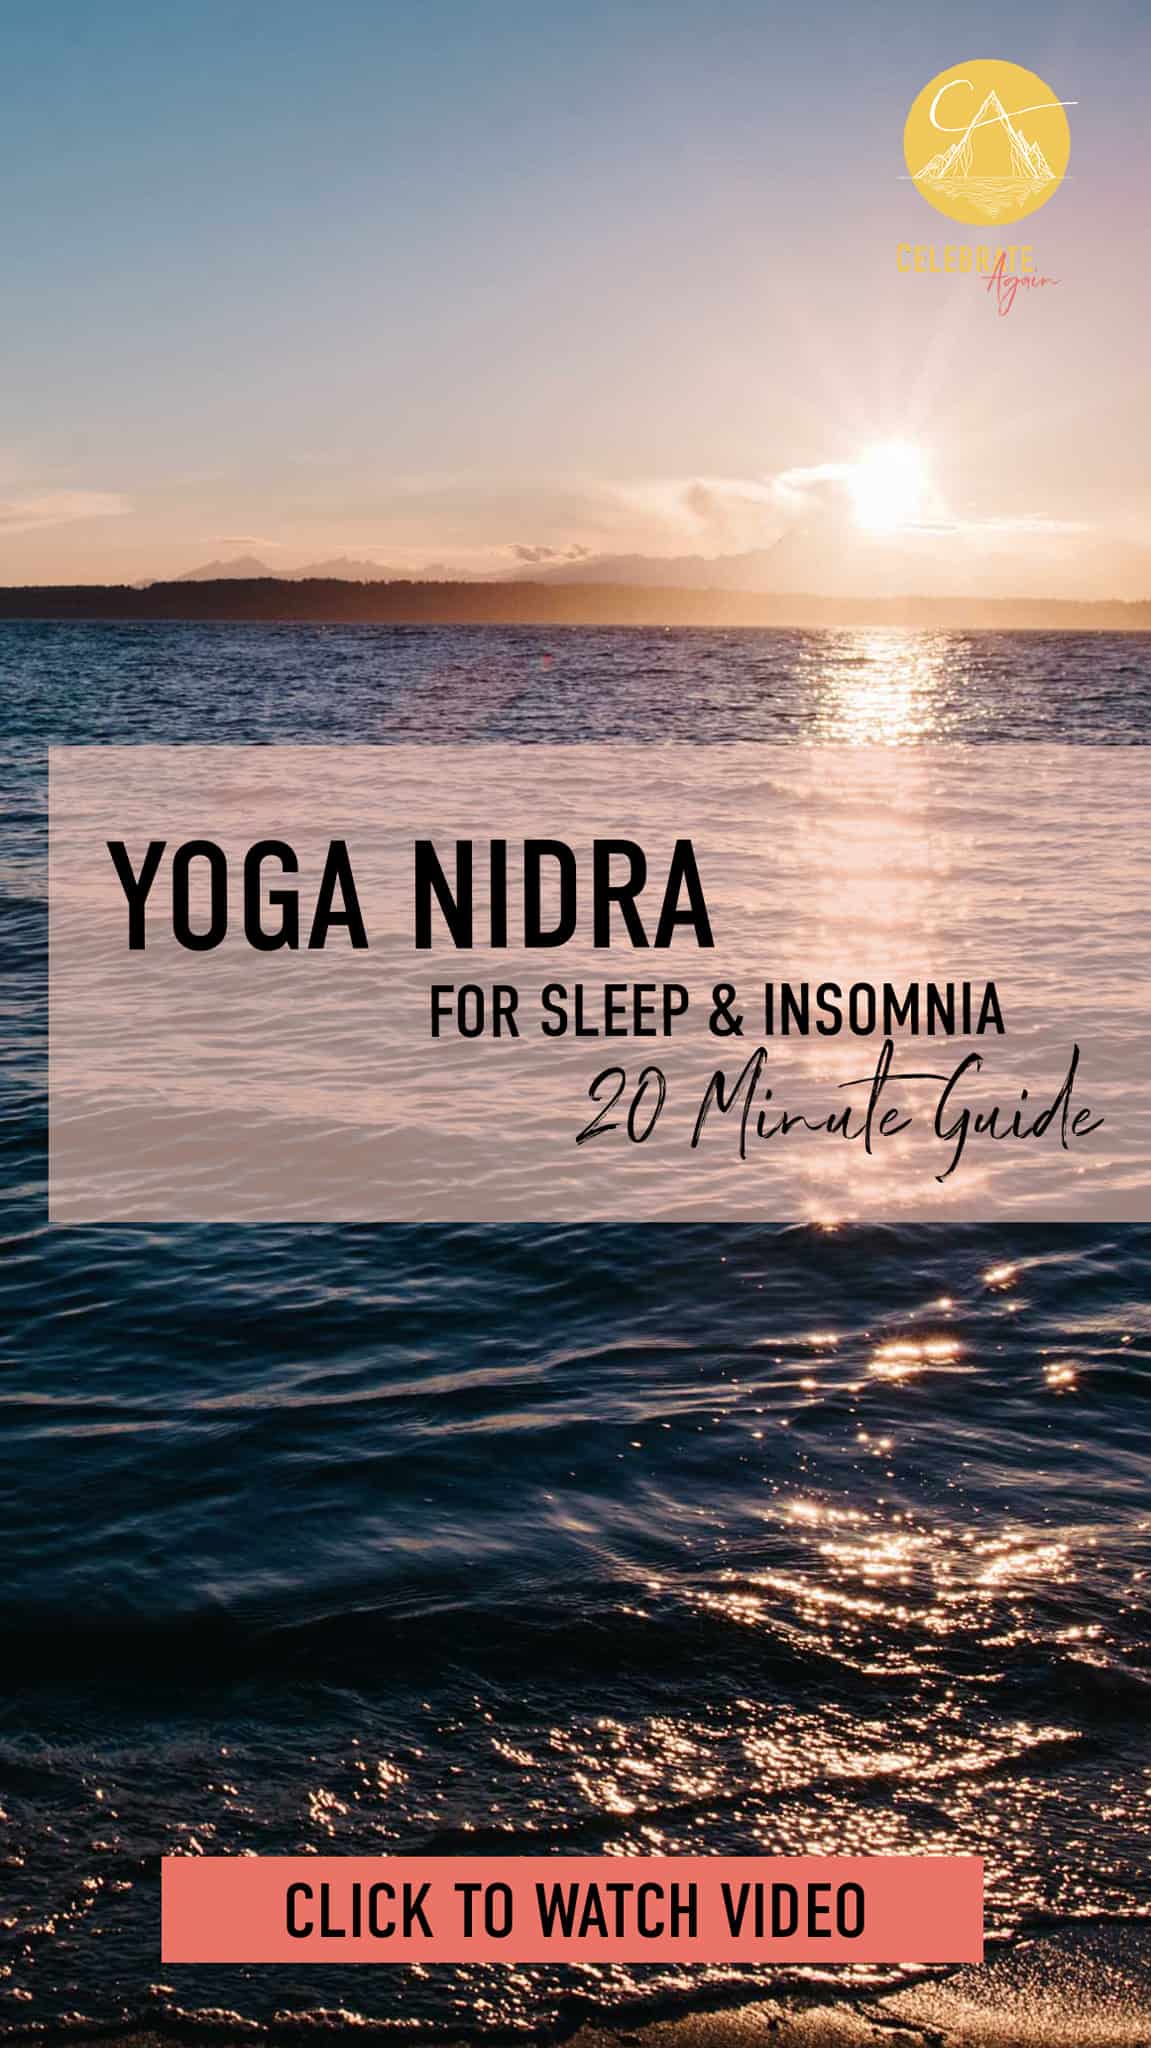 view of the sunsetting on the water with small mountains in the background text saying "Yoga Nidra for sleep and insomnia 20 minute guide" "click here to watch video"